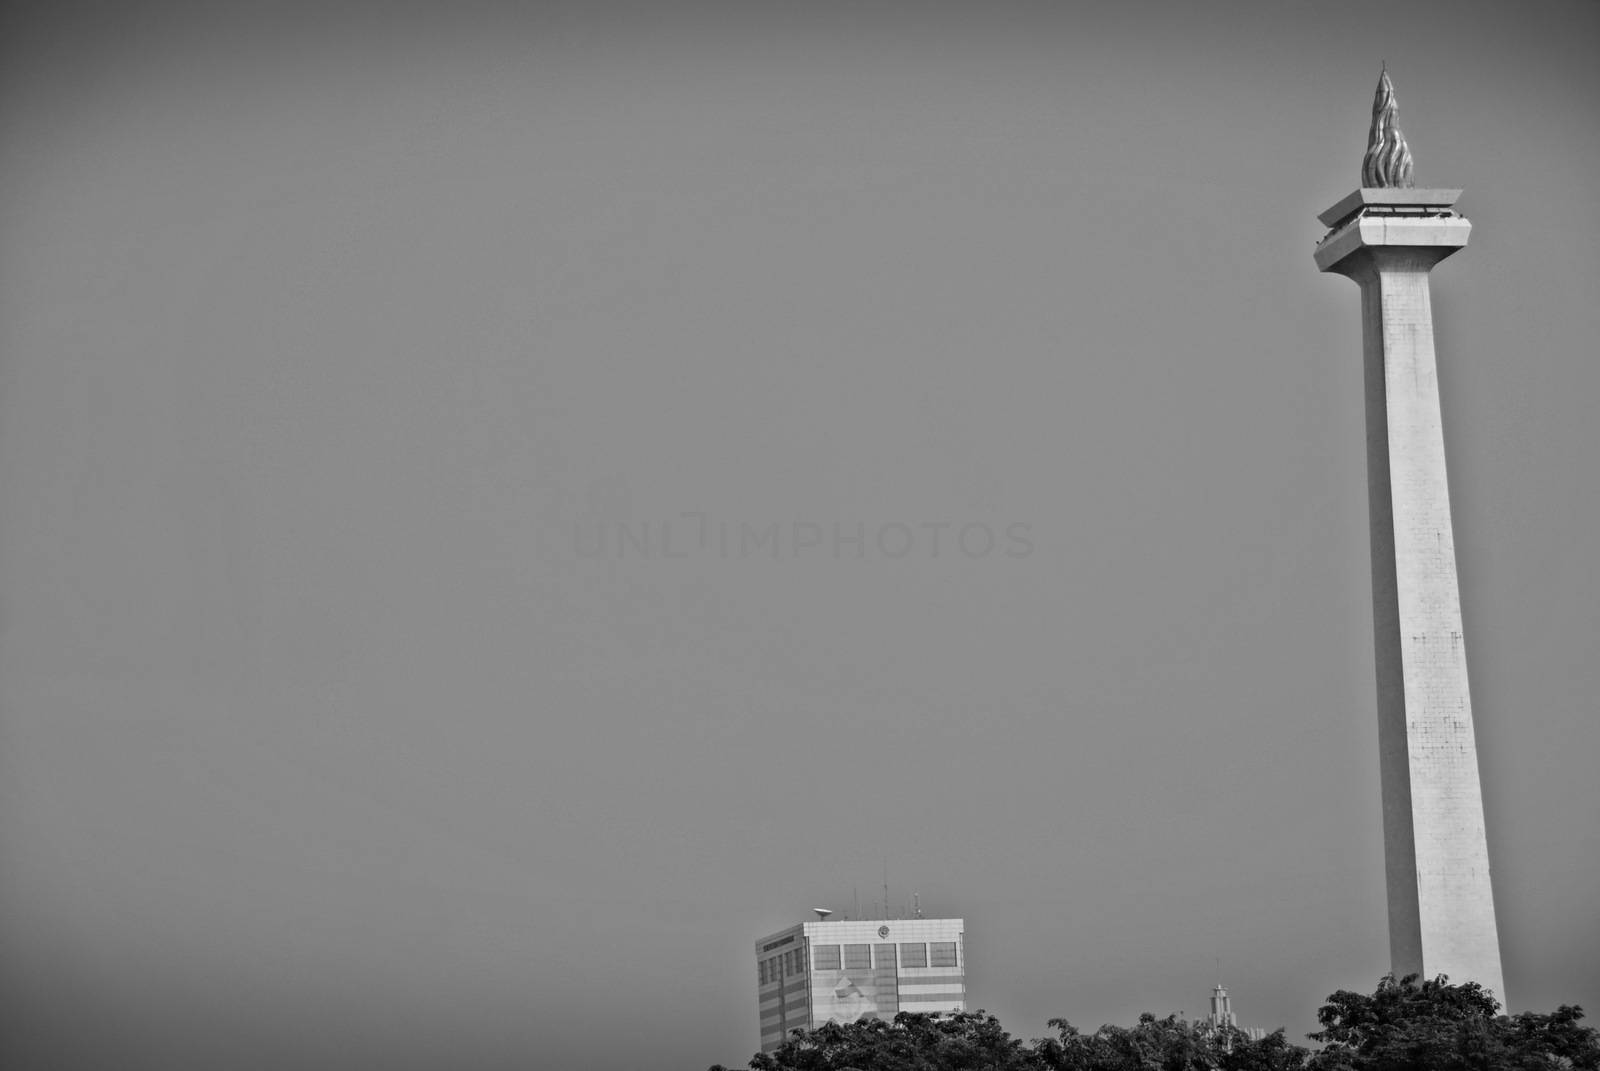 National Monument or MONAS (Monumen Nasional) seen from Gambir Train Station in Jakarta, Indonesia by craigansibin